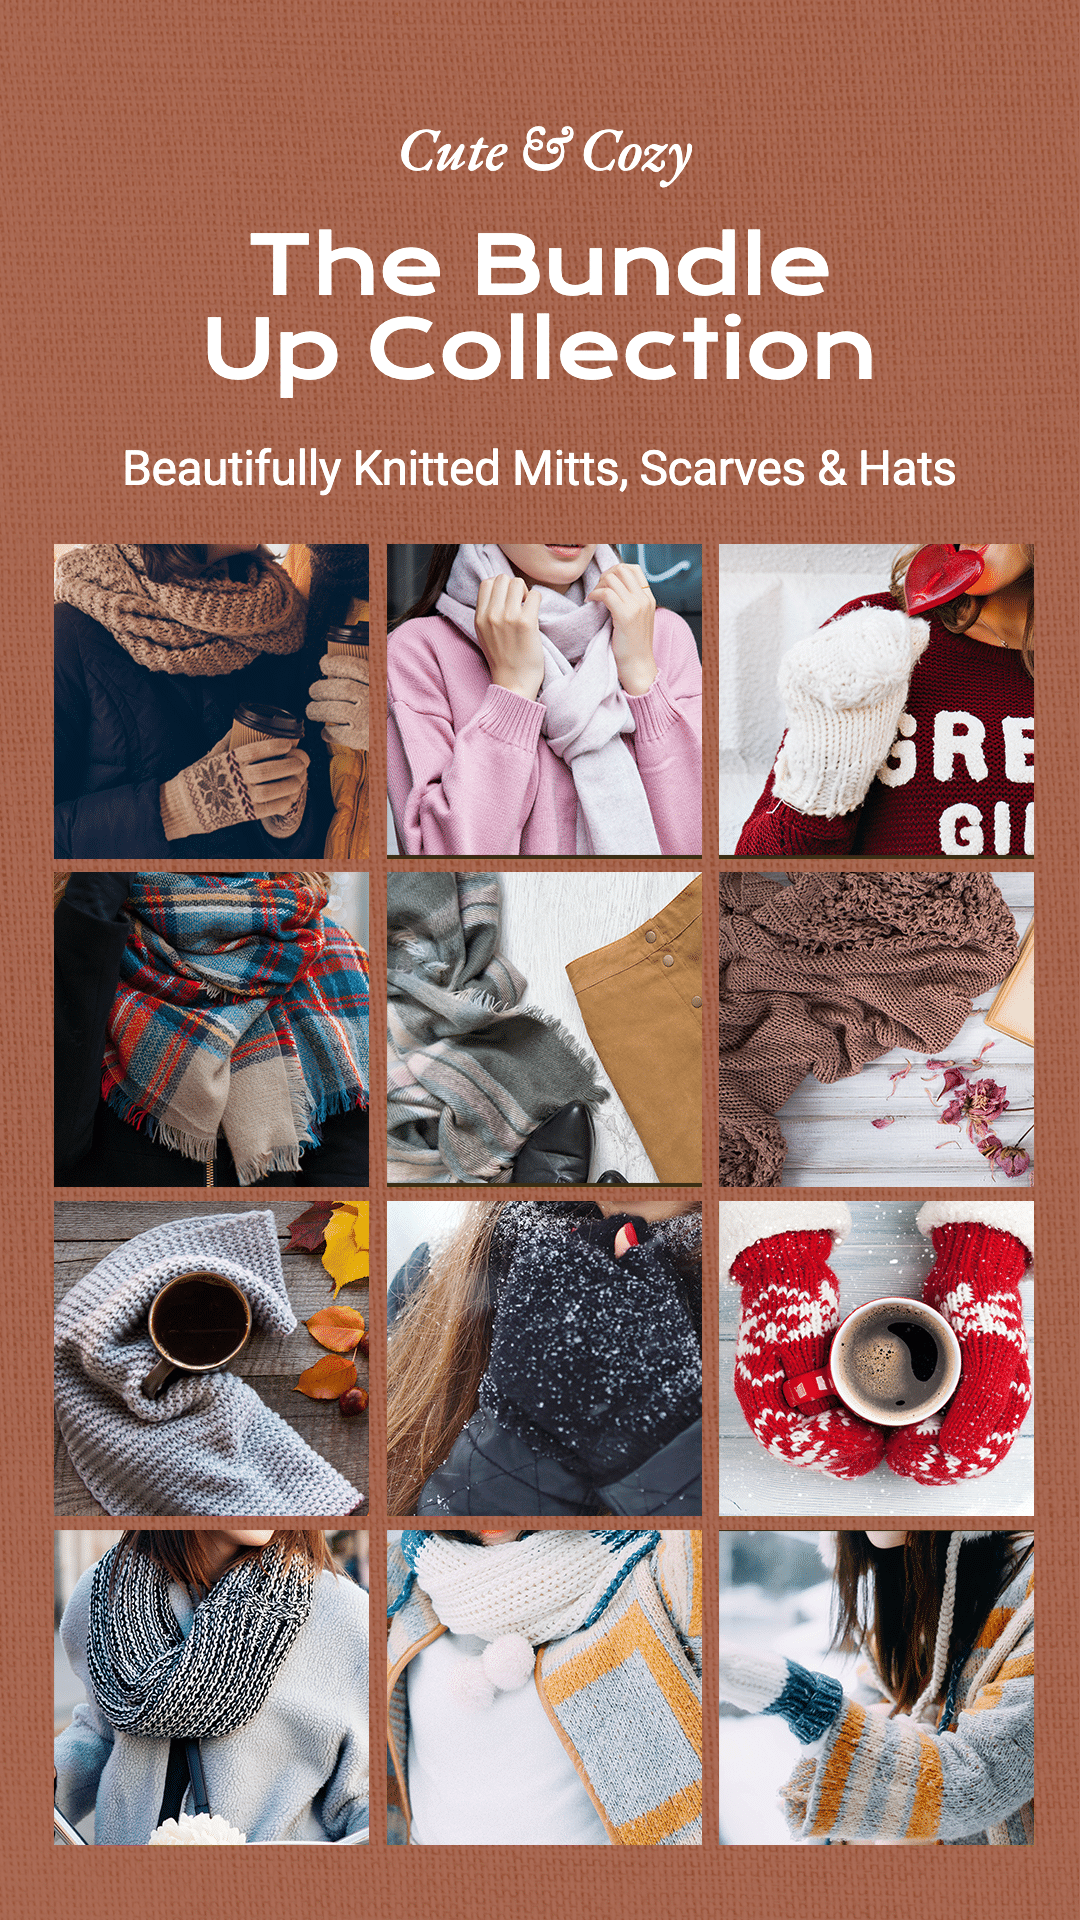 Winter Knitted Mitts Scarves Hats Collection 预览效果